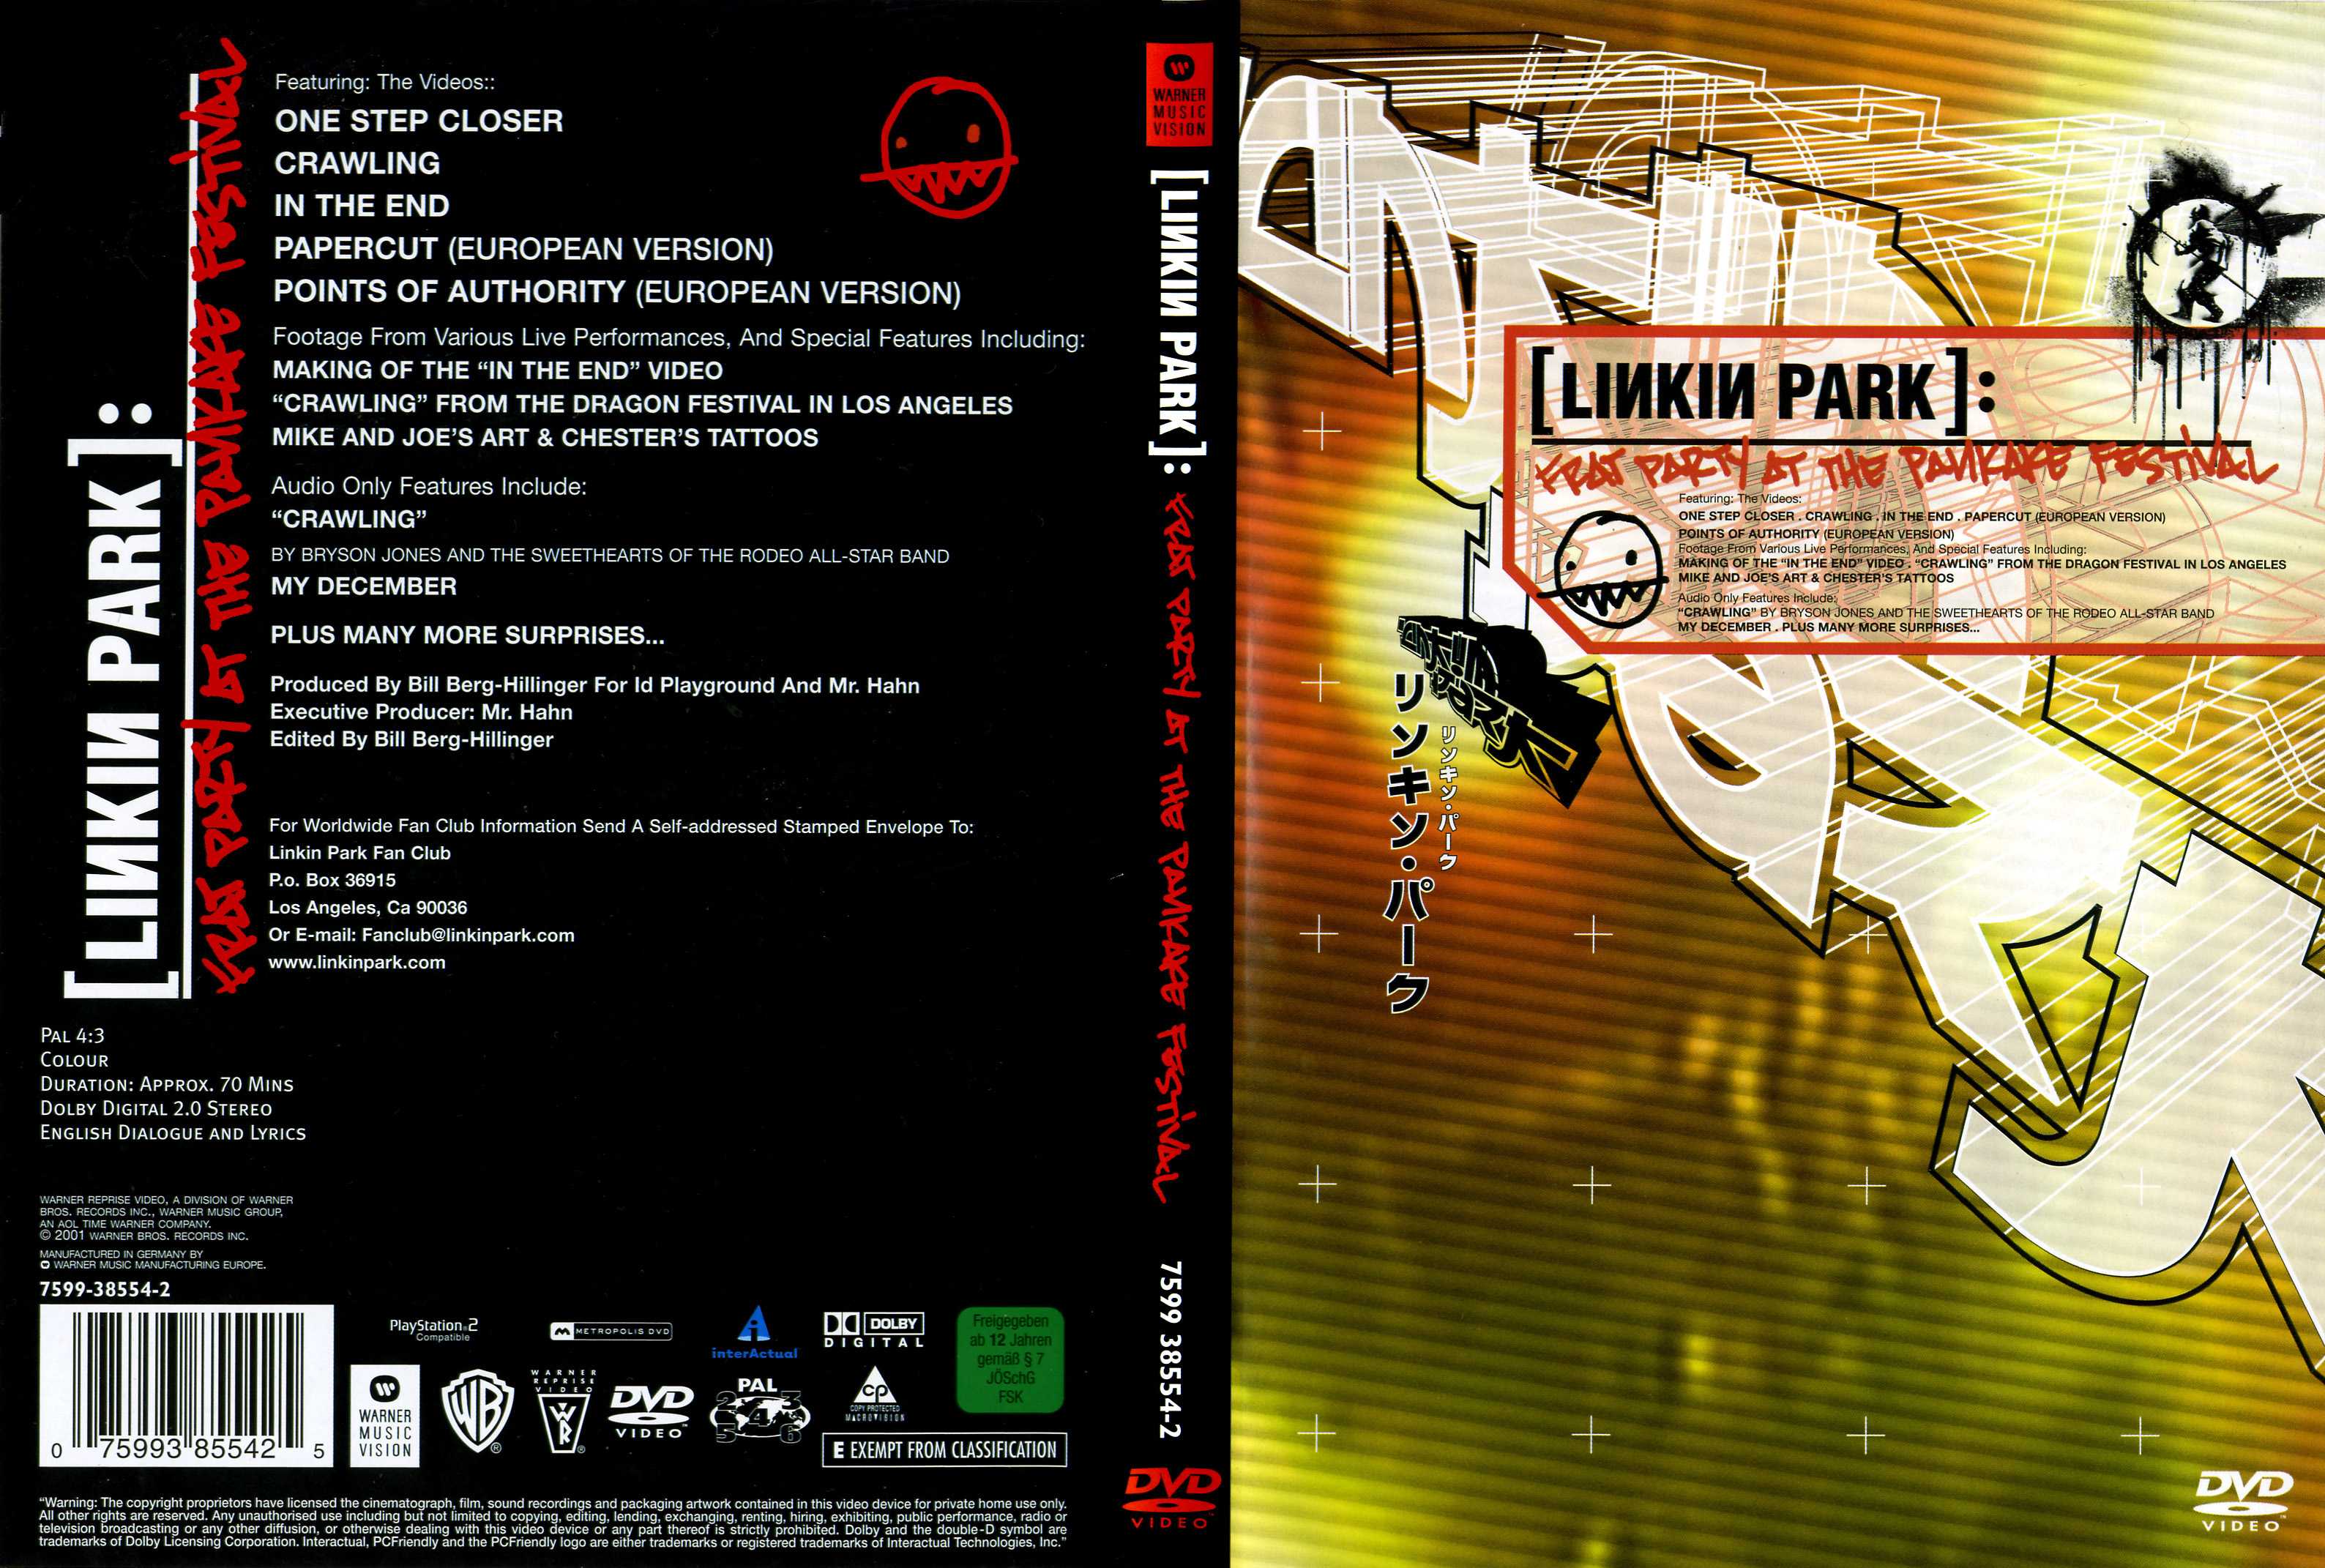 Jaquette DVD Linkin Park frat party at the pankake festival